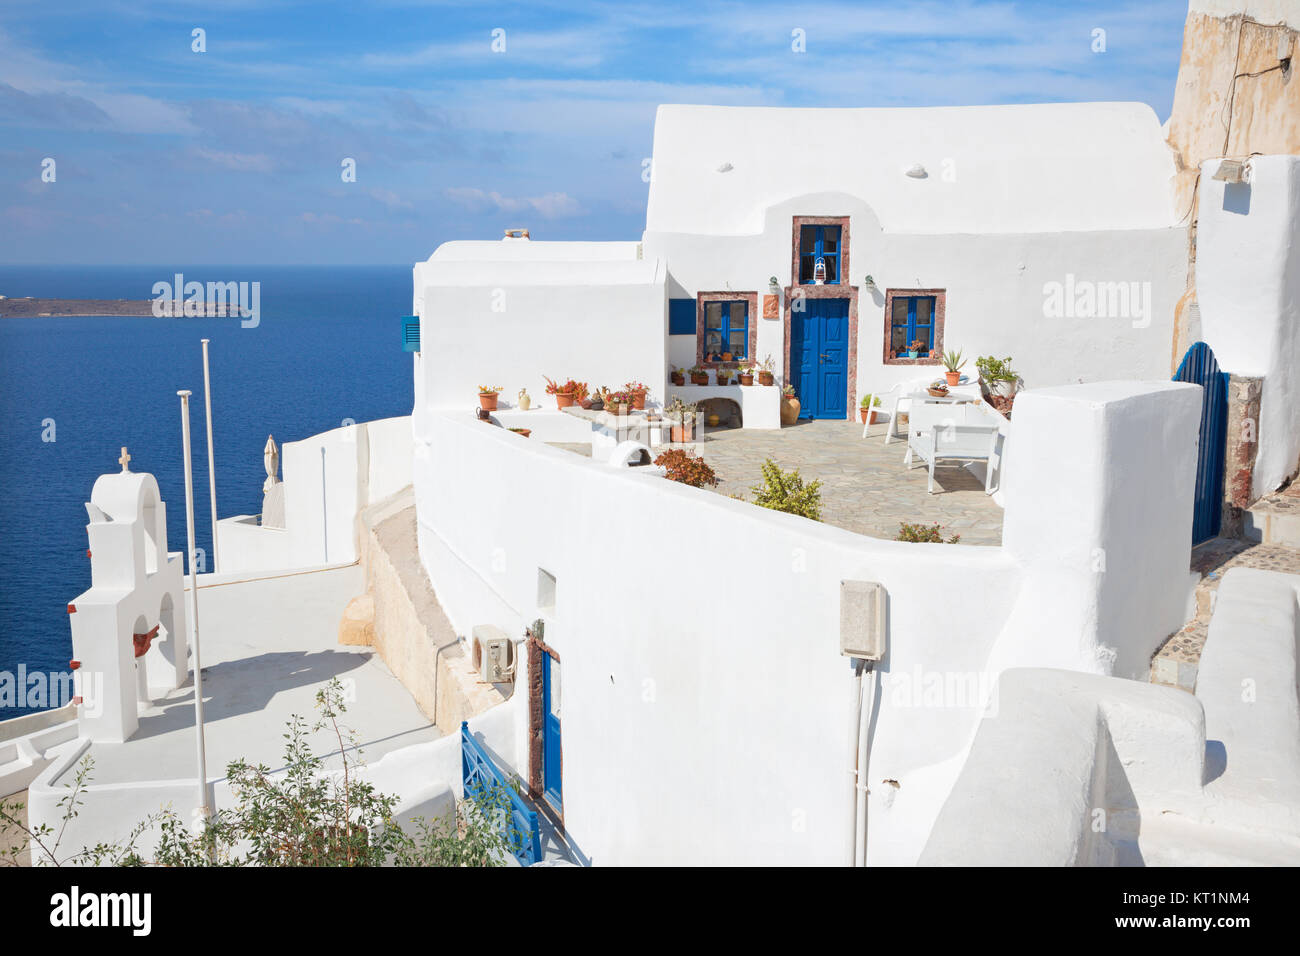 Santorini - The typically little house and yard with he flowers in Oia. Stock Photo